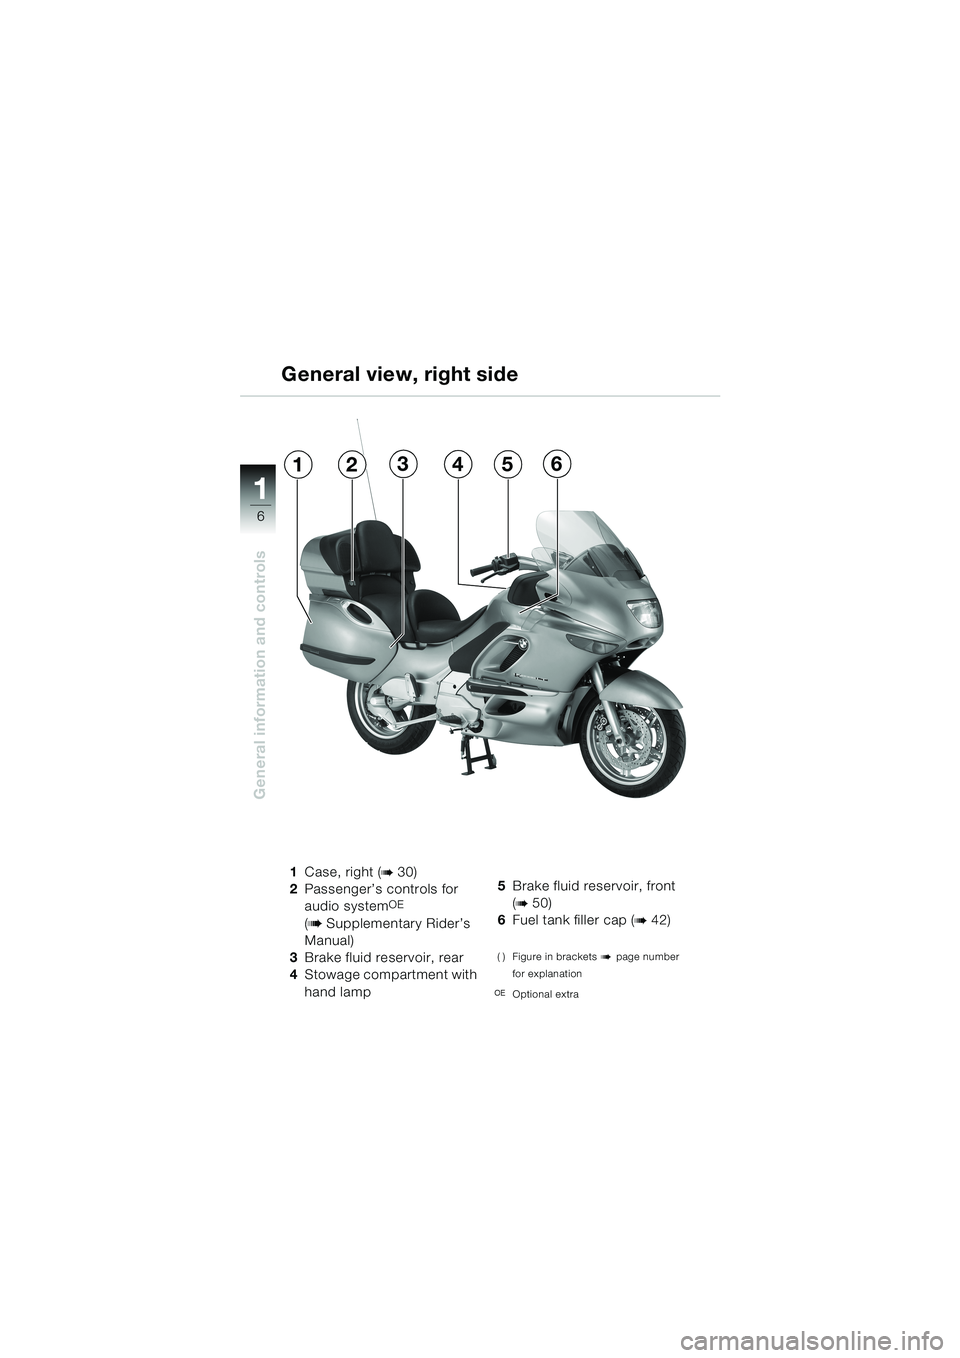 BMW MOTORRAD K 1200 LT 2002  Riders Manual (in English) 6
General information and controls
1
General view, right side
1Case, right (b 30)
2Passenger’s controls for
audio system
OE 
(
b Supplementary Rider’s 
Manual)
3Brake fluid reservoir, rear 
4Stowa